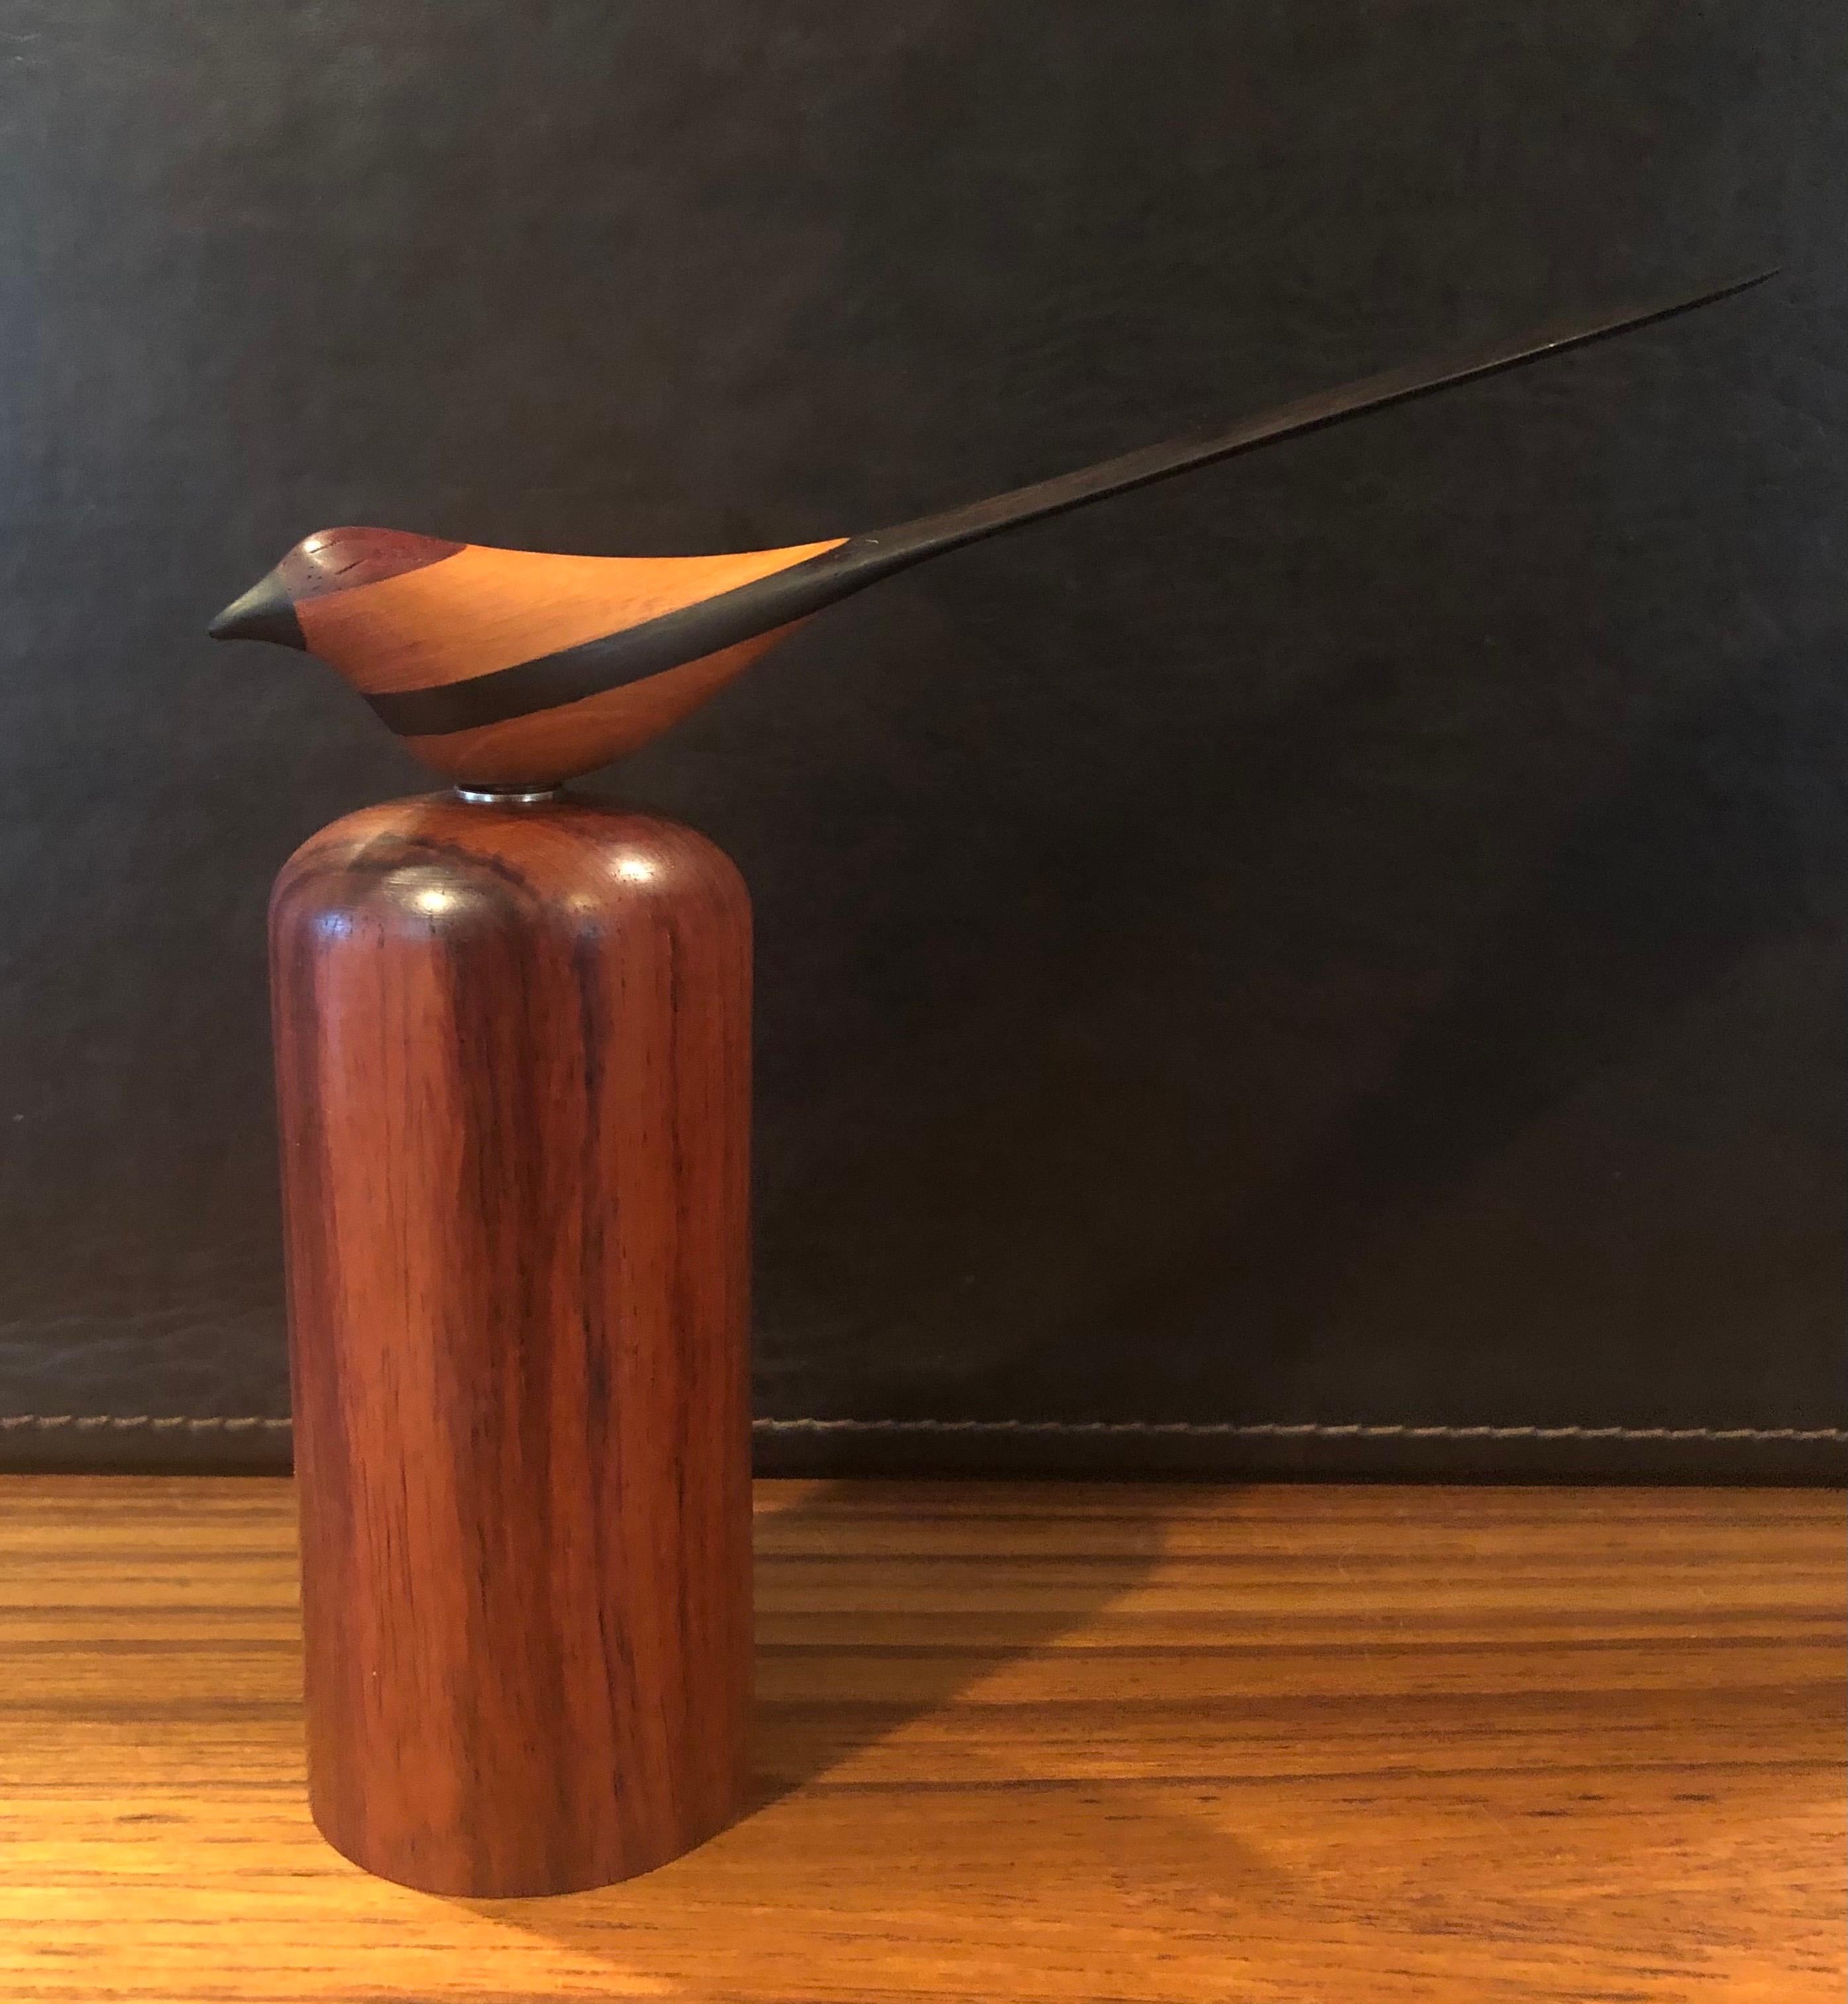 Fabulous MCM hand carved bird sculpture in mixed woods on a rosewood pedestal signed RYO?, circa 1970s. The piece is of exceptionally high quality and attaches to the solid rosewood pedestal via a strong magnet. It is signed on the bottom and is in